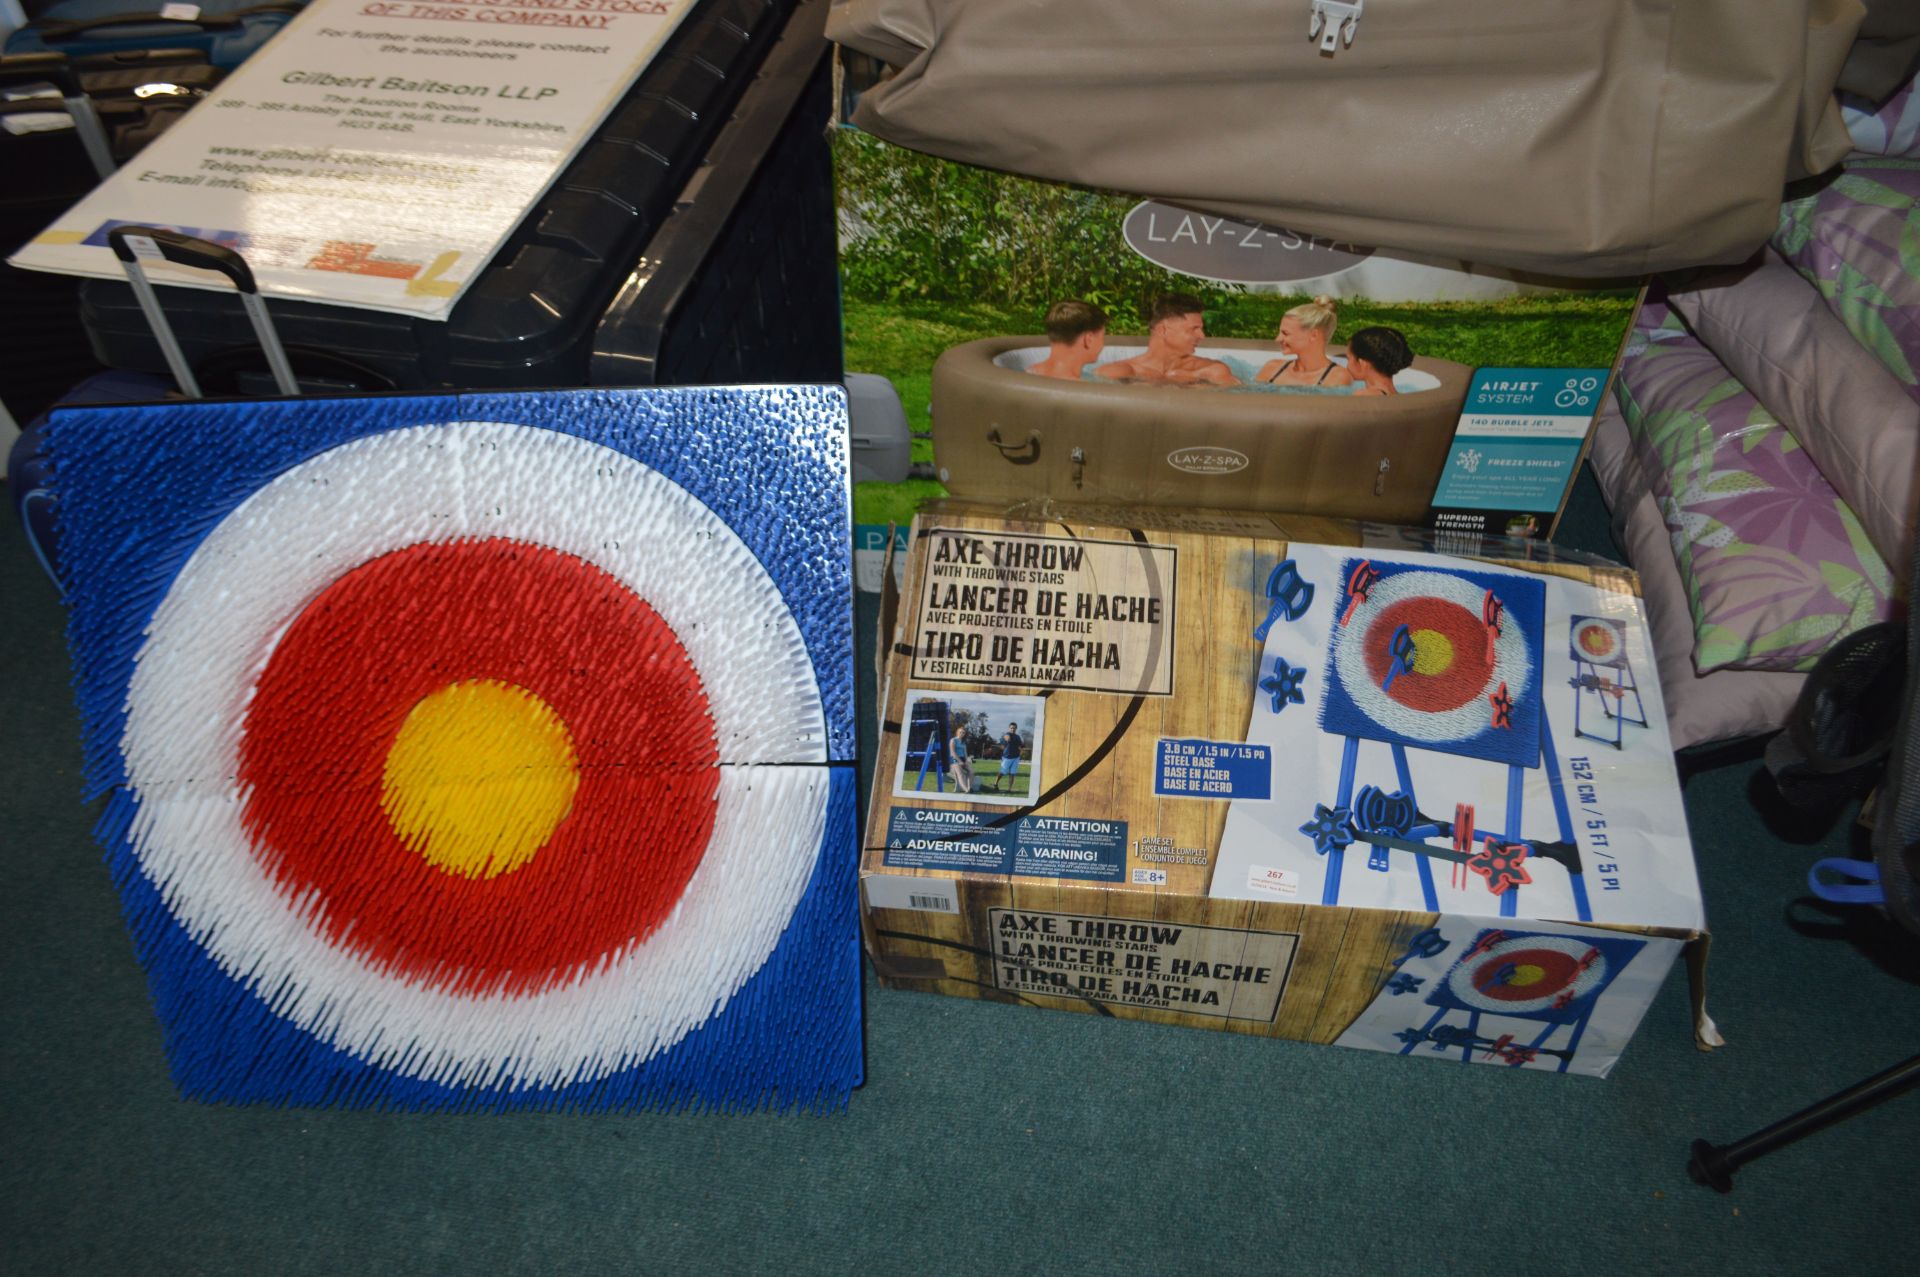 *Axe Throwing Target with Throwing Axes and Stars